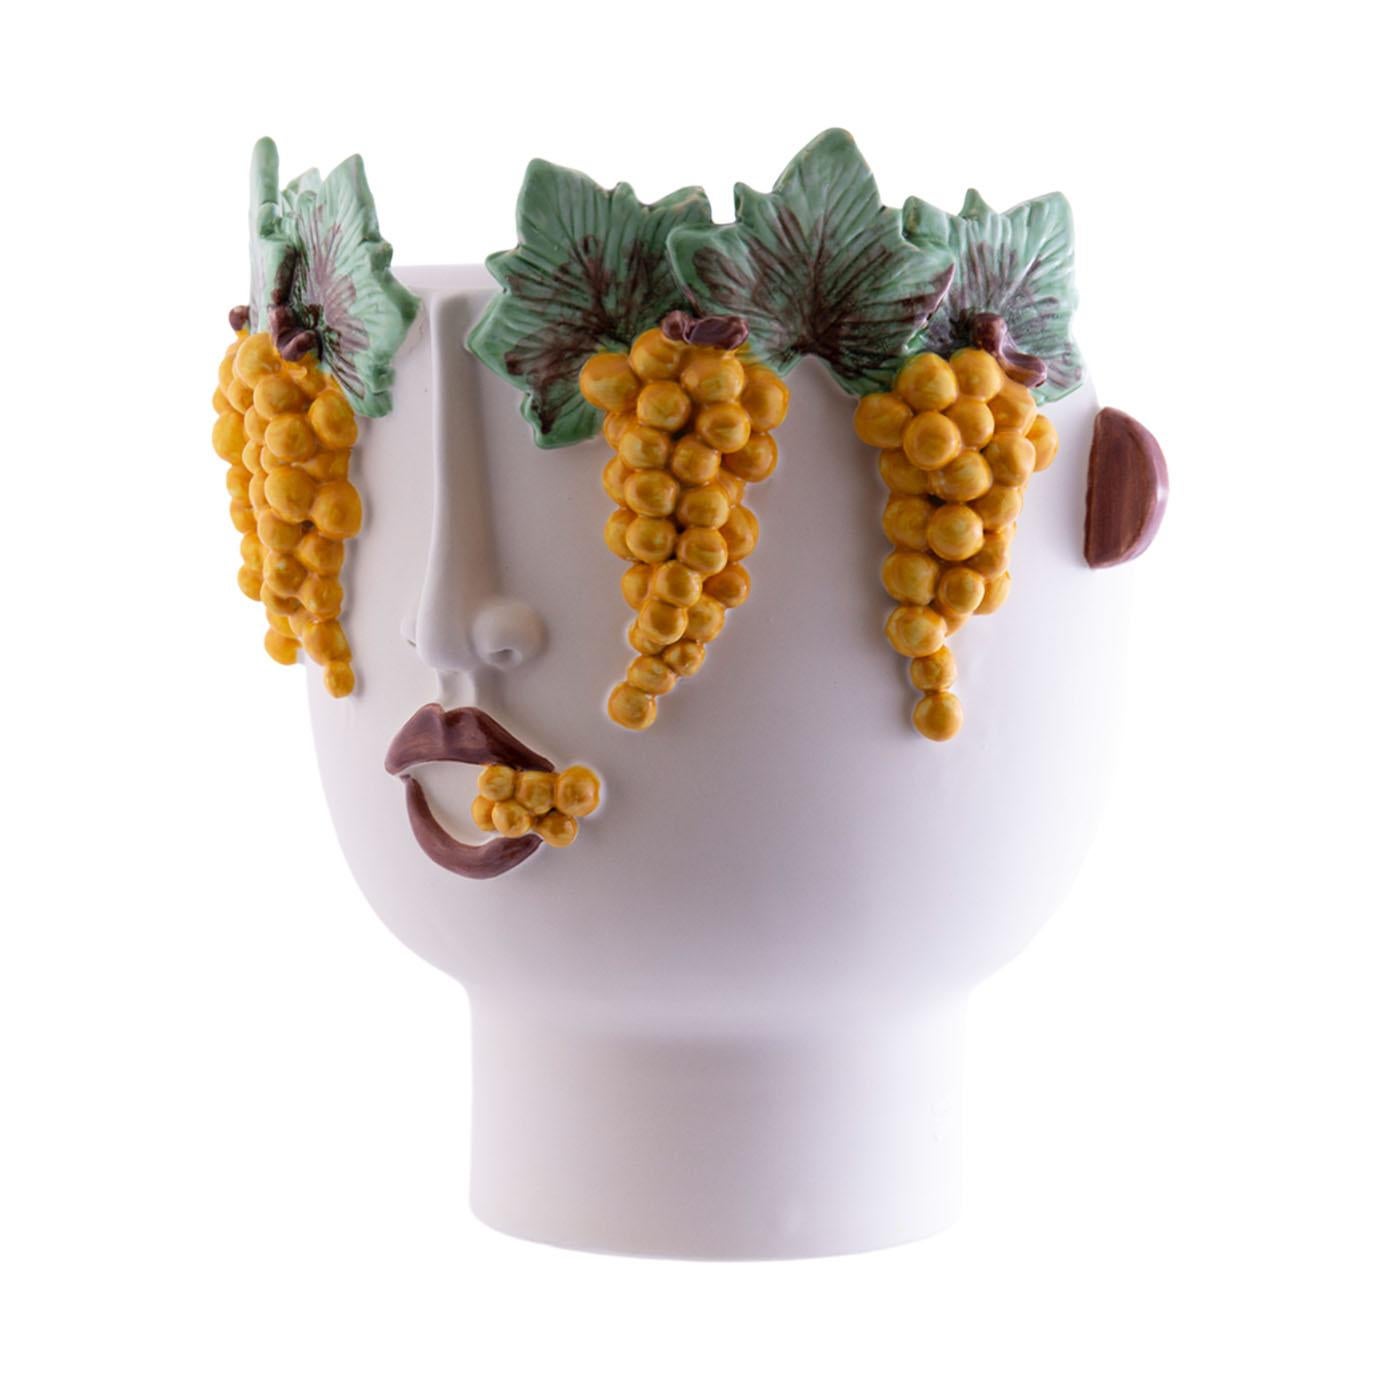 The second fire-fired ceramic head, handmade with face and white grapes reliefs, can be used to hold plants, flowers and sometimes even bottles with ice. Malvasia sells White grapes at the Palermo market, a beautiful and amazing woman!